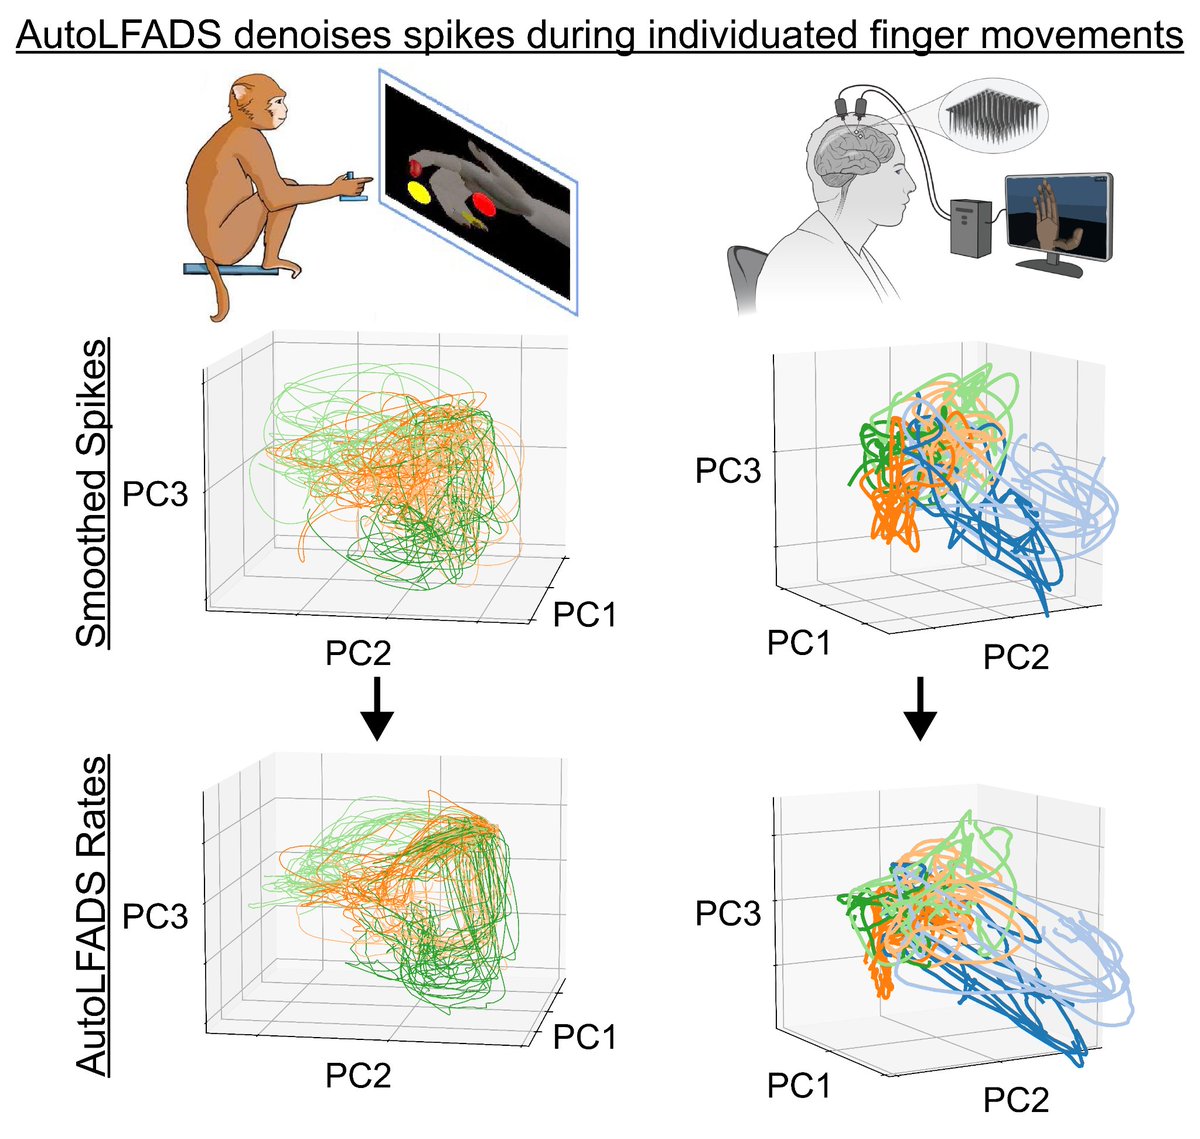 Ever wonder if neural dynamics modeling improves individuated finger decoding like it does for arm reaches? So did we, so check out our Wednesday AM #SfN23 poster where we applied AutoLFADS to denoise monkey and human spiking activity during finger movements!

 PSTR488.08 / JJ19